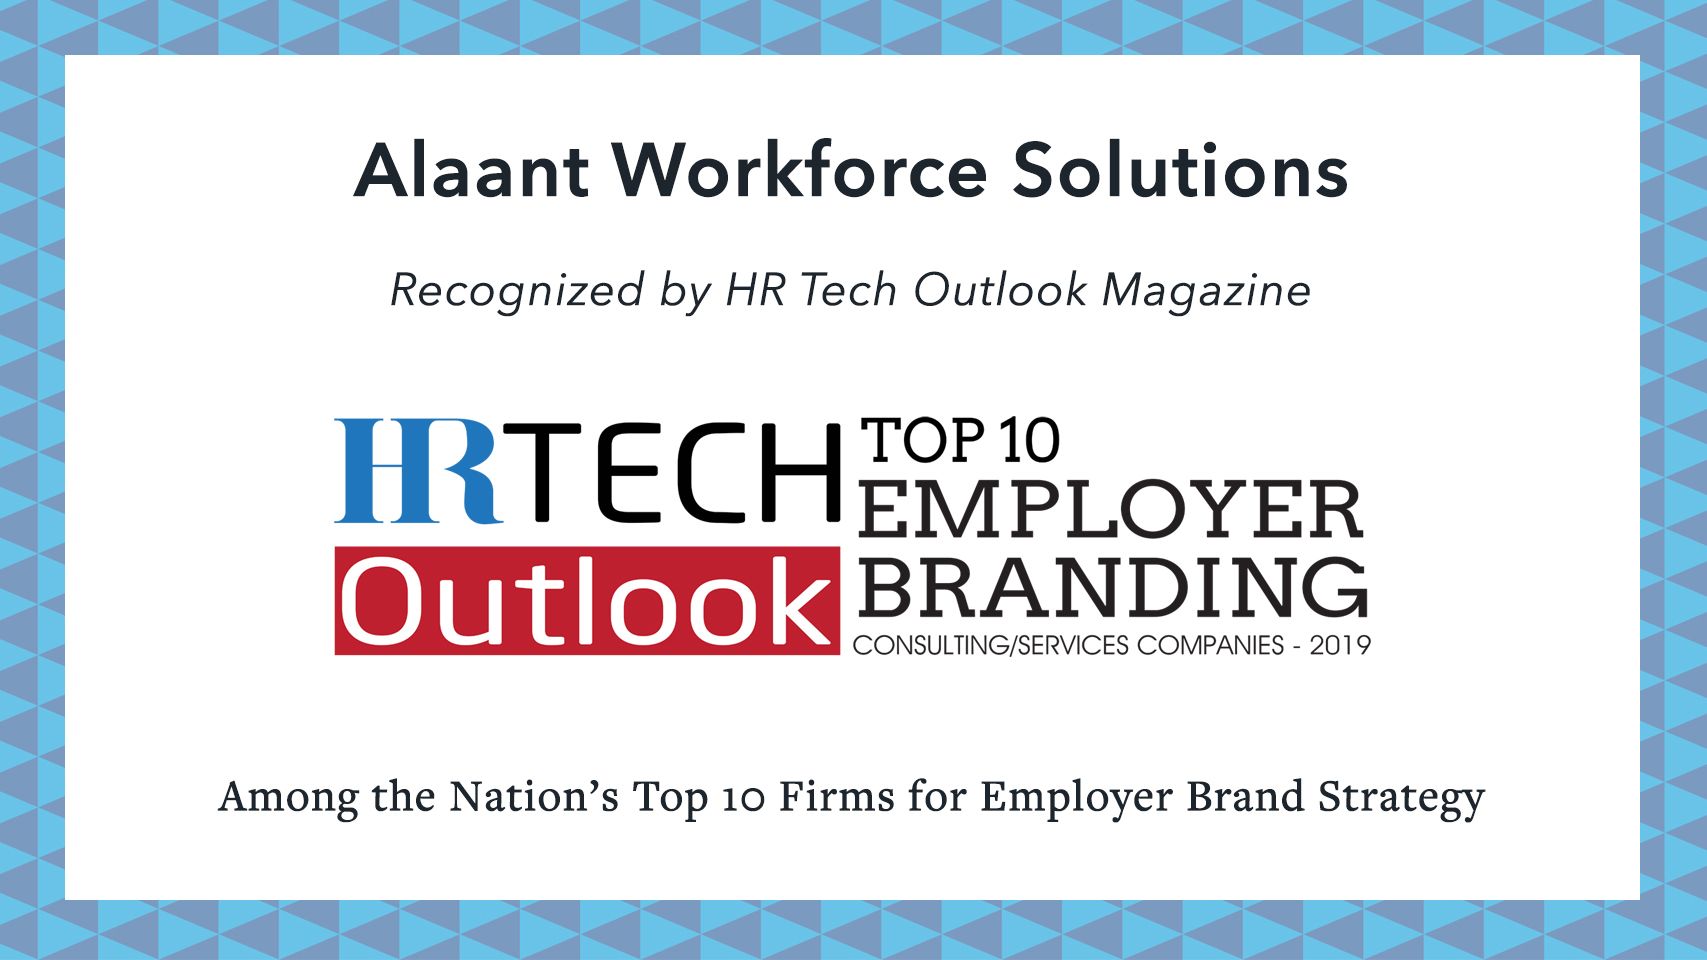 Alaant Workforce Solutions Selected by HR Tech Outlook  Among the Nation’s Top 10 Firms for Employer Brand Strategy 